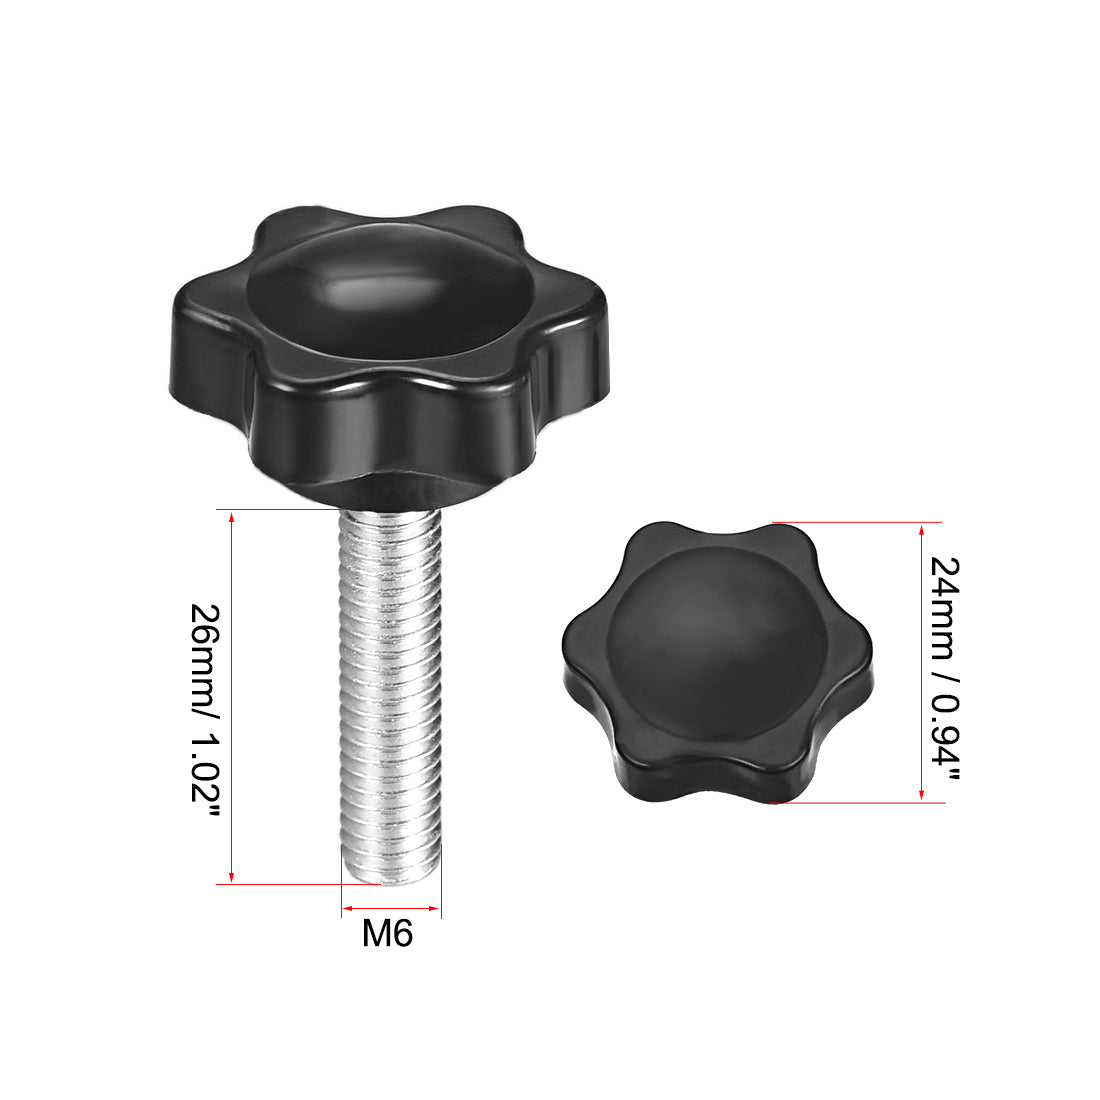 uxcell Uxcell Clamping Handle Gripandles Screw Knobs Handgrips Star Knob  Male Thread pcs